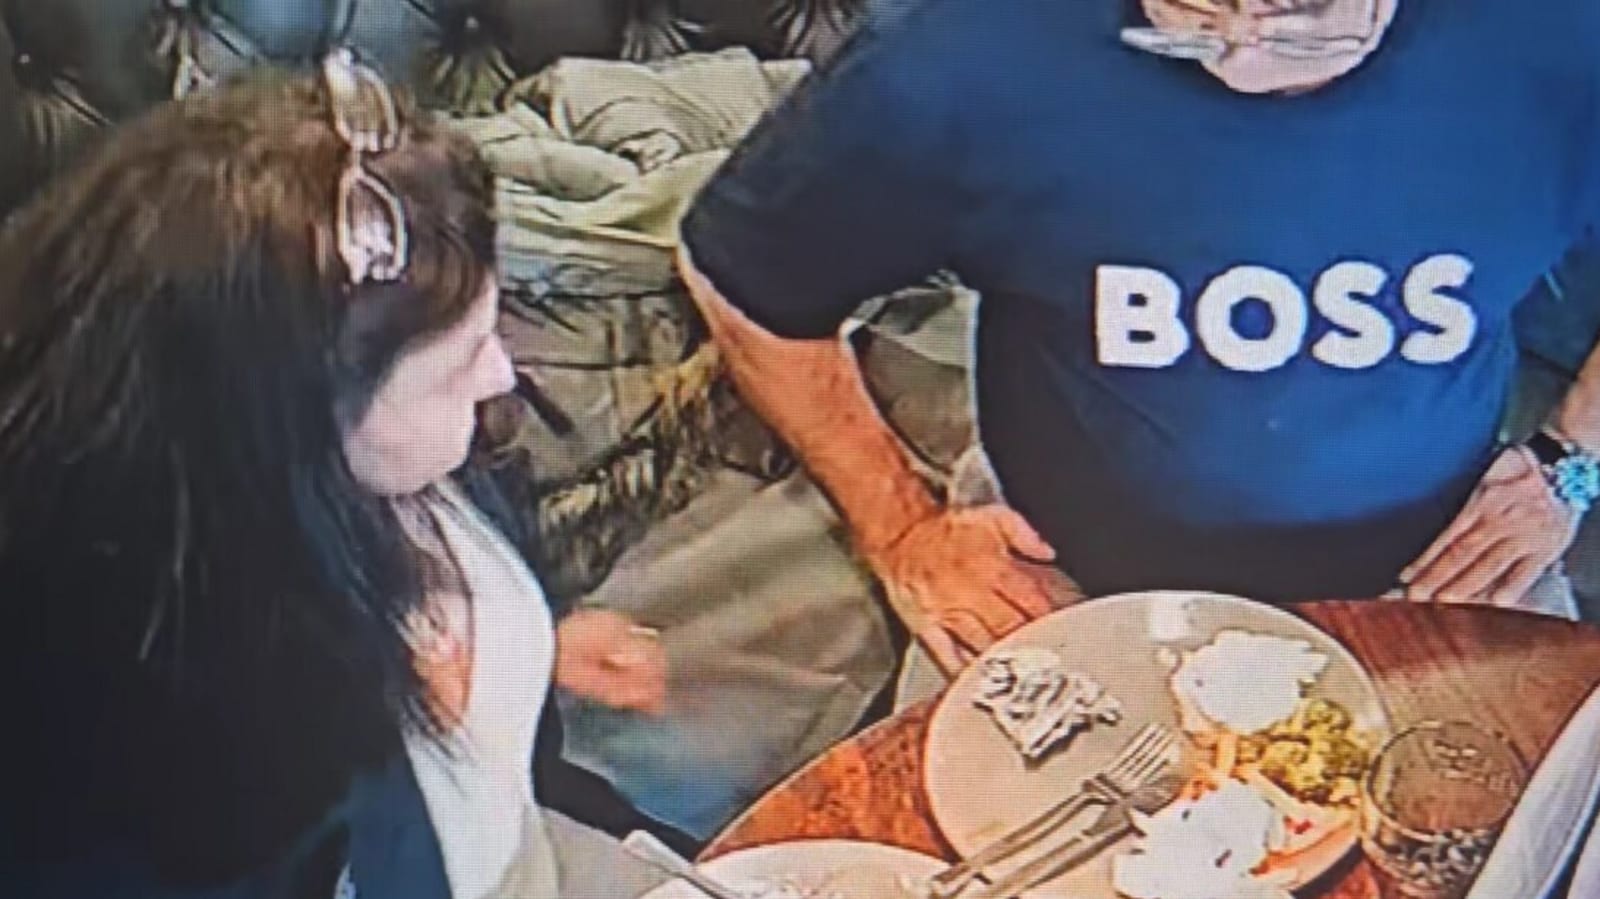 Woman caught putting hair in food to get free meal, her act caught on camera